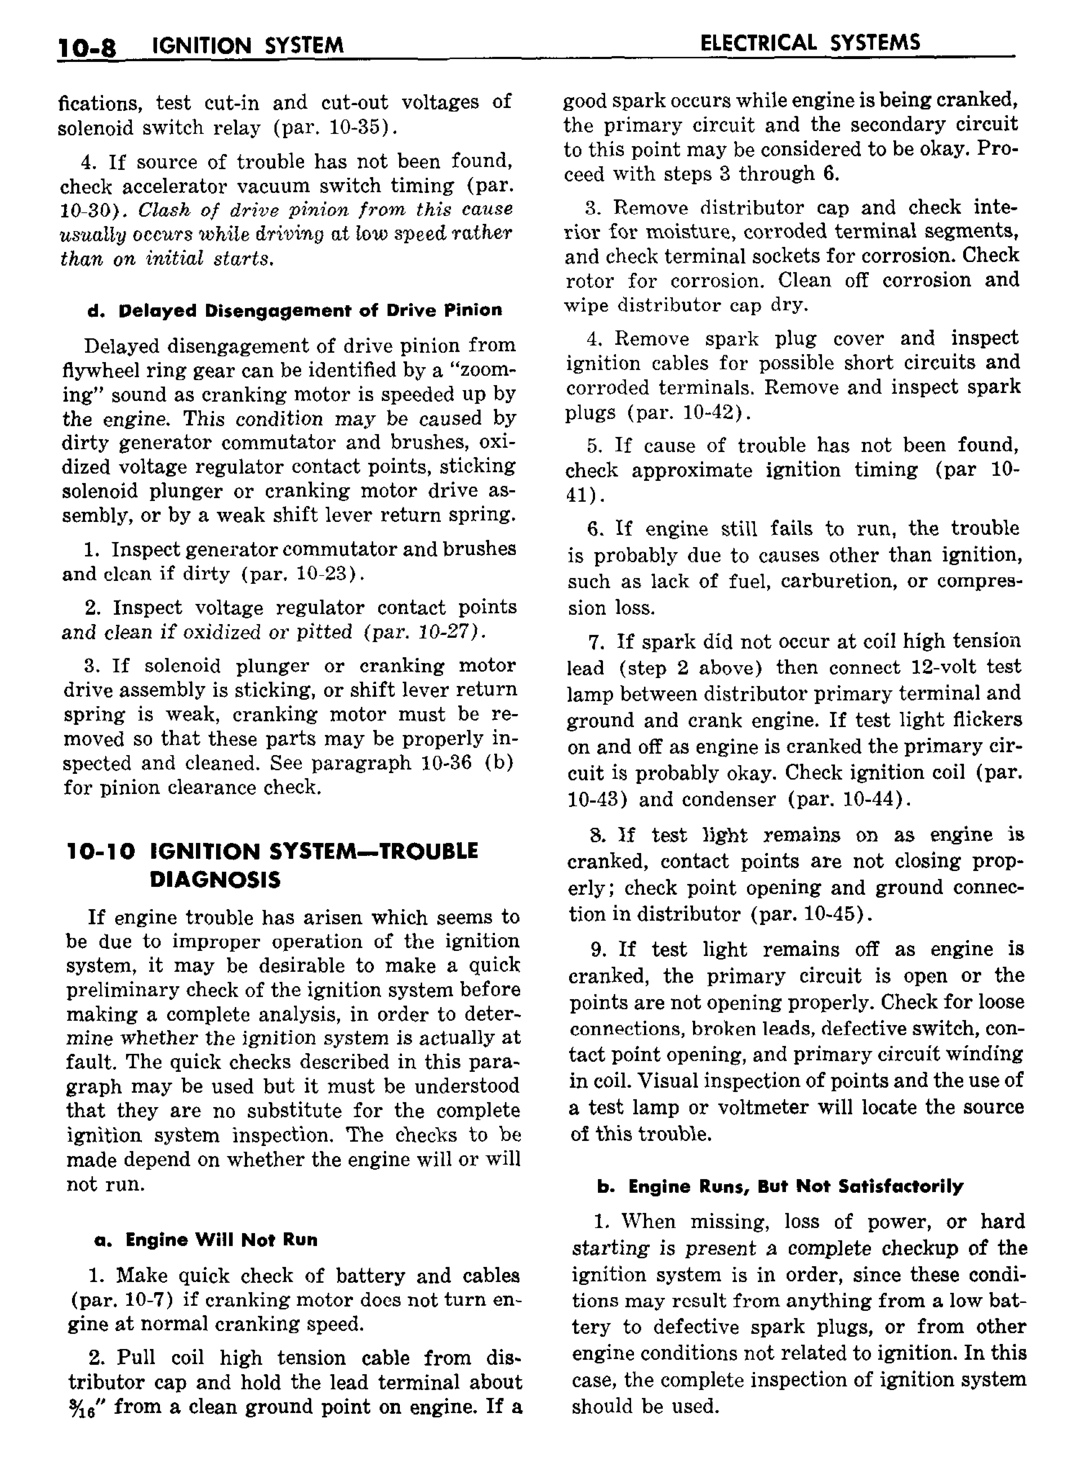 n_11 1959 Buick Shop Manual - Electrical Systems-008-008.jpg